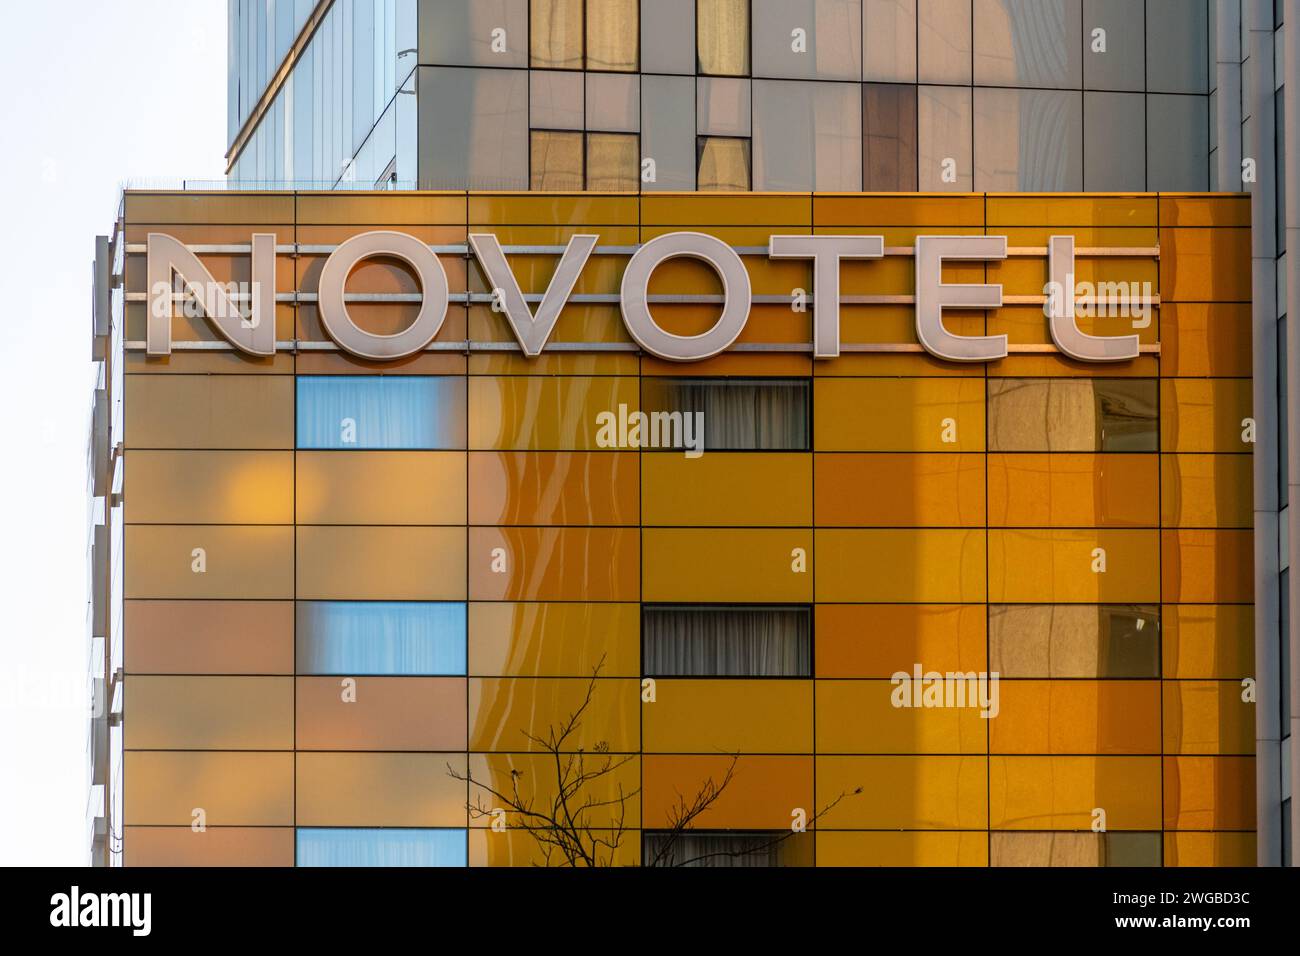 Novotel with sign at Canary Wharf, London, England, UK. Hotel accommodation on the Isle of Dogs. Stock Photo